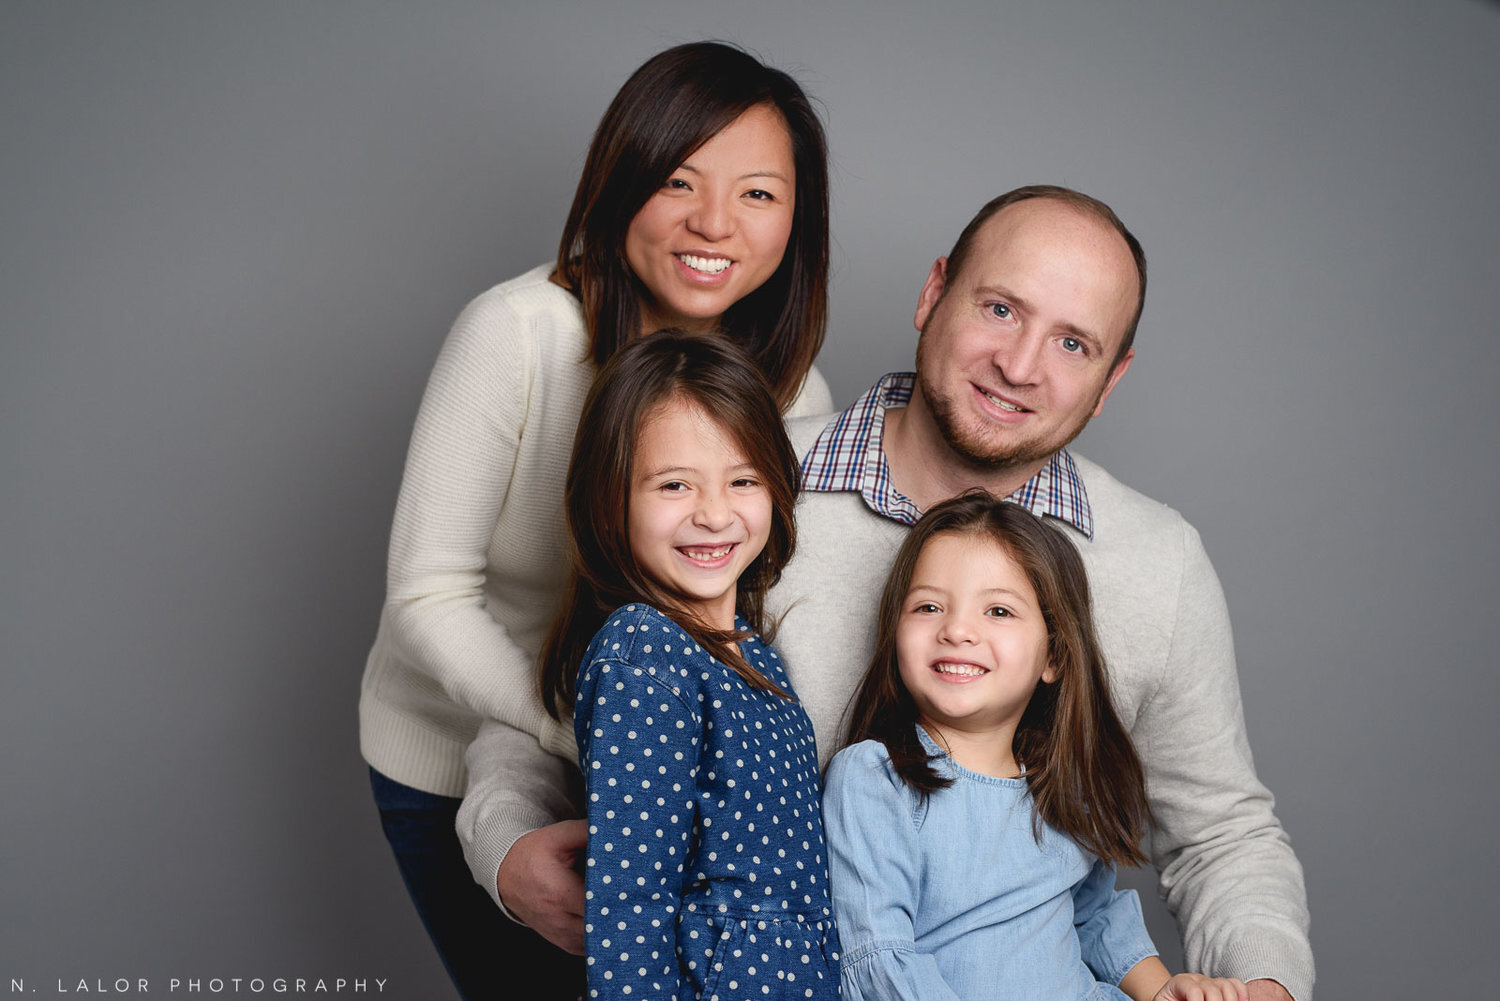 nlalor-photography-2016-12-13-studio-family-two-girls-greenwich-connecticut-12.jpg